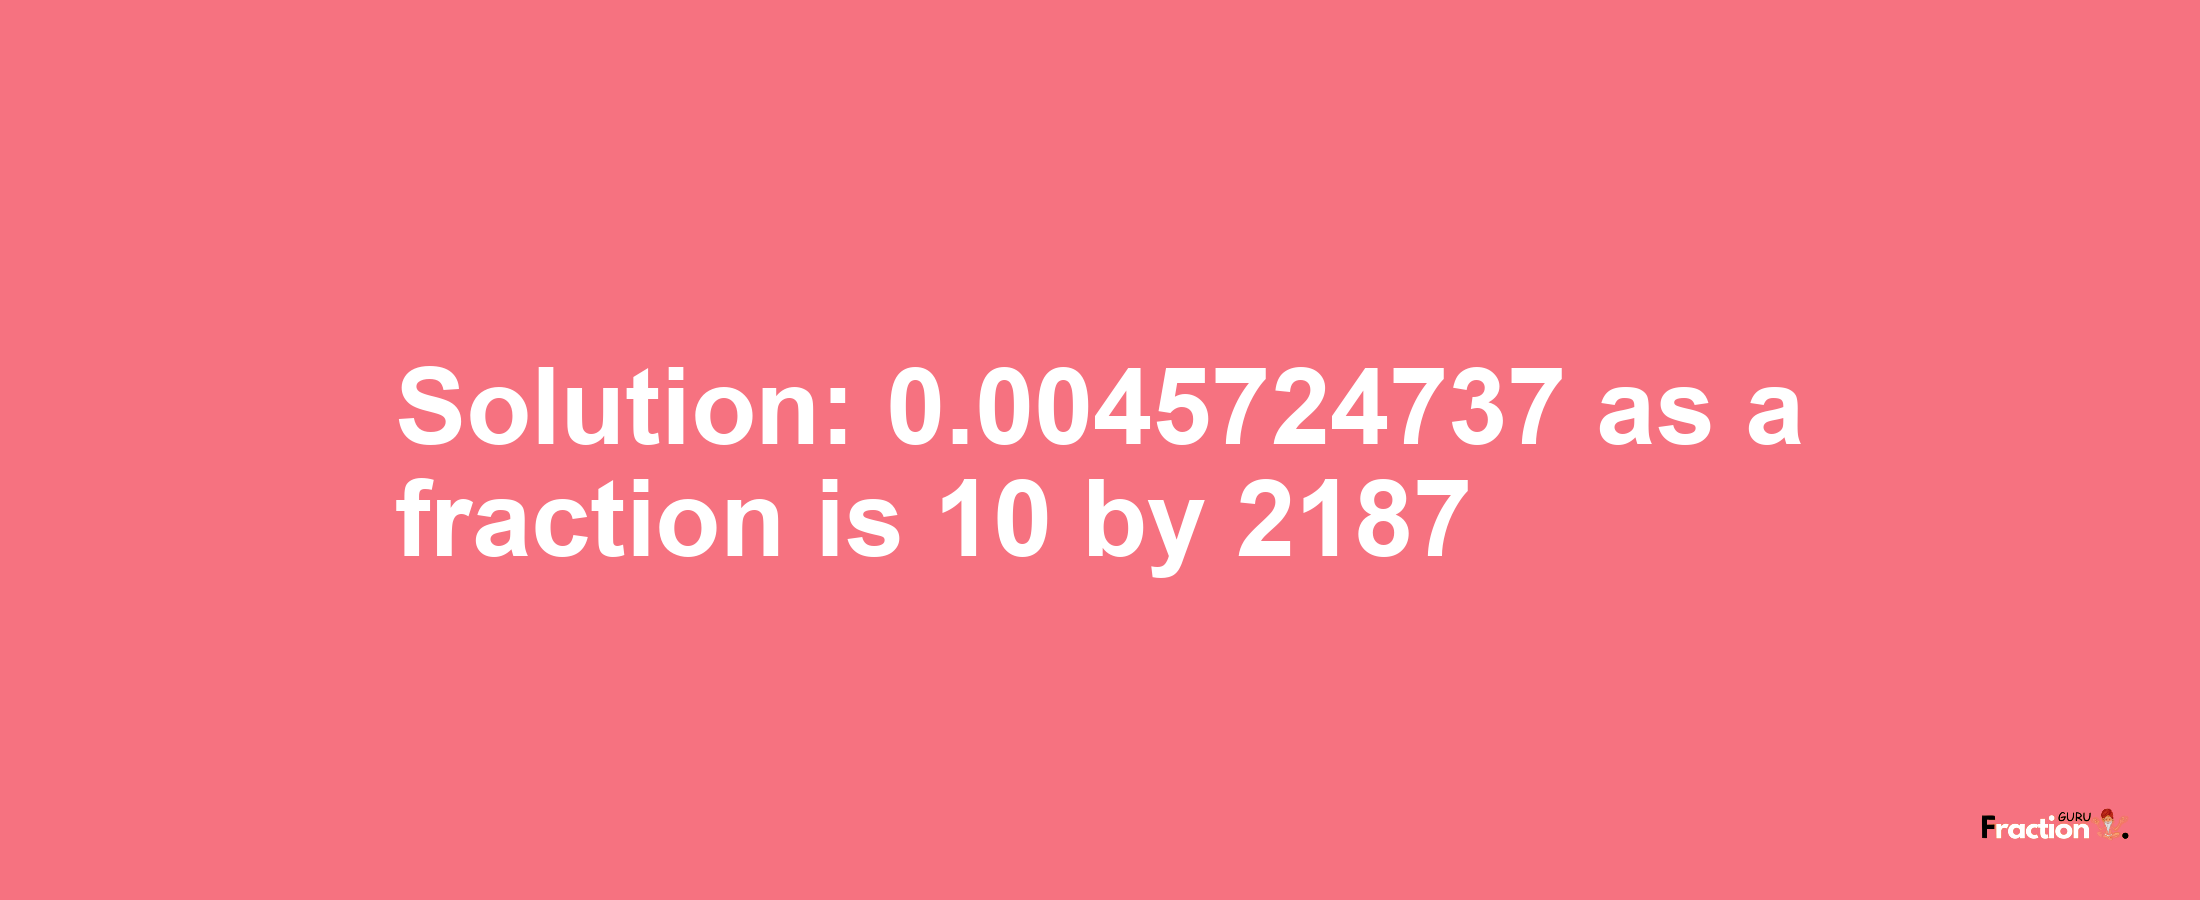 Solution:0.0045724737 as a fraction is 10/2187